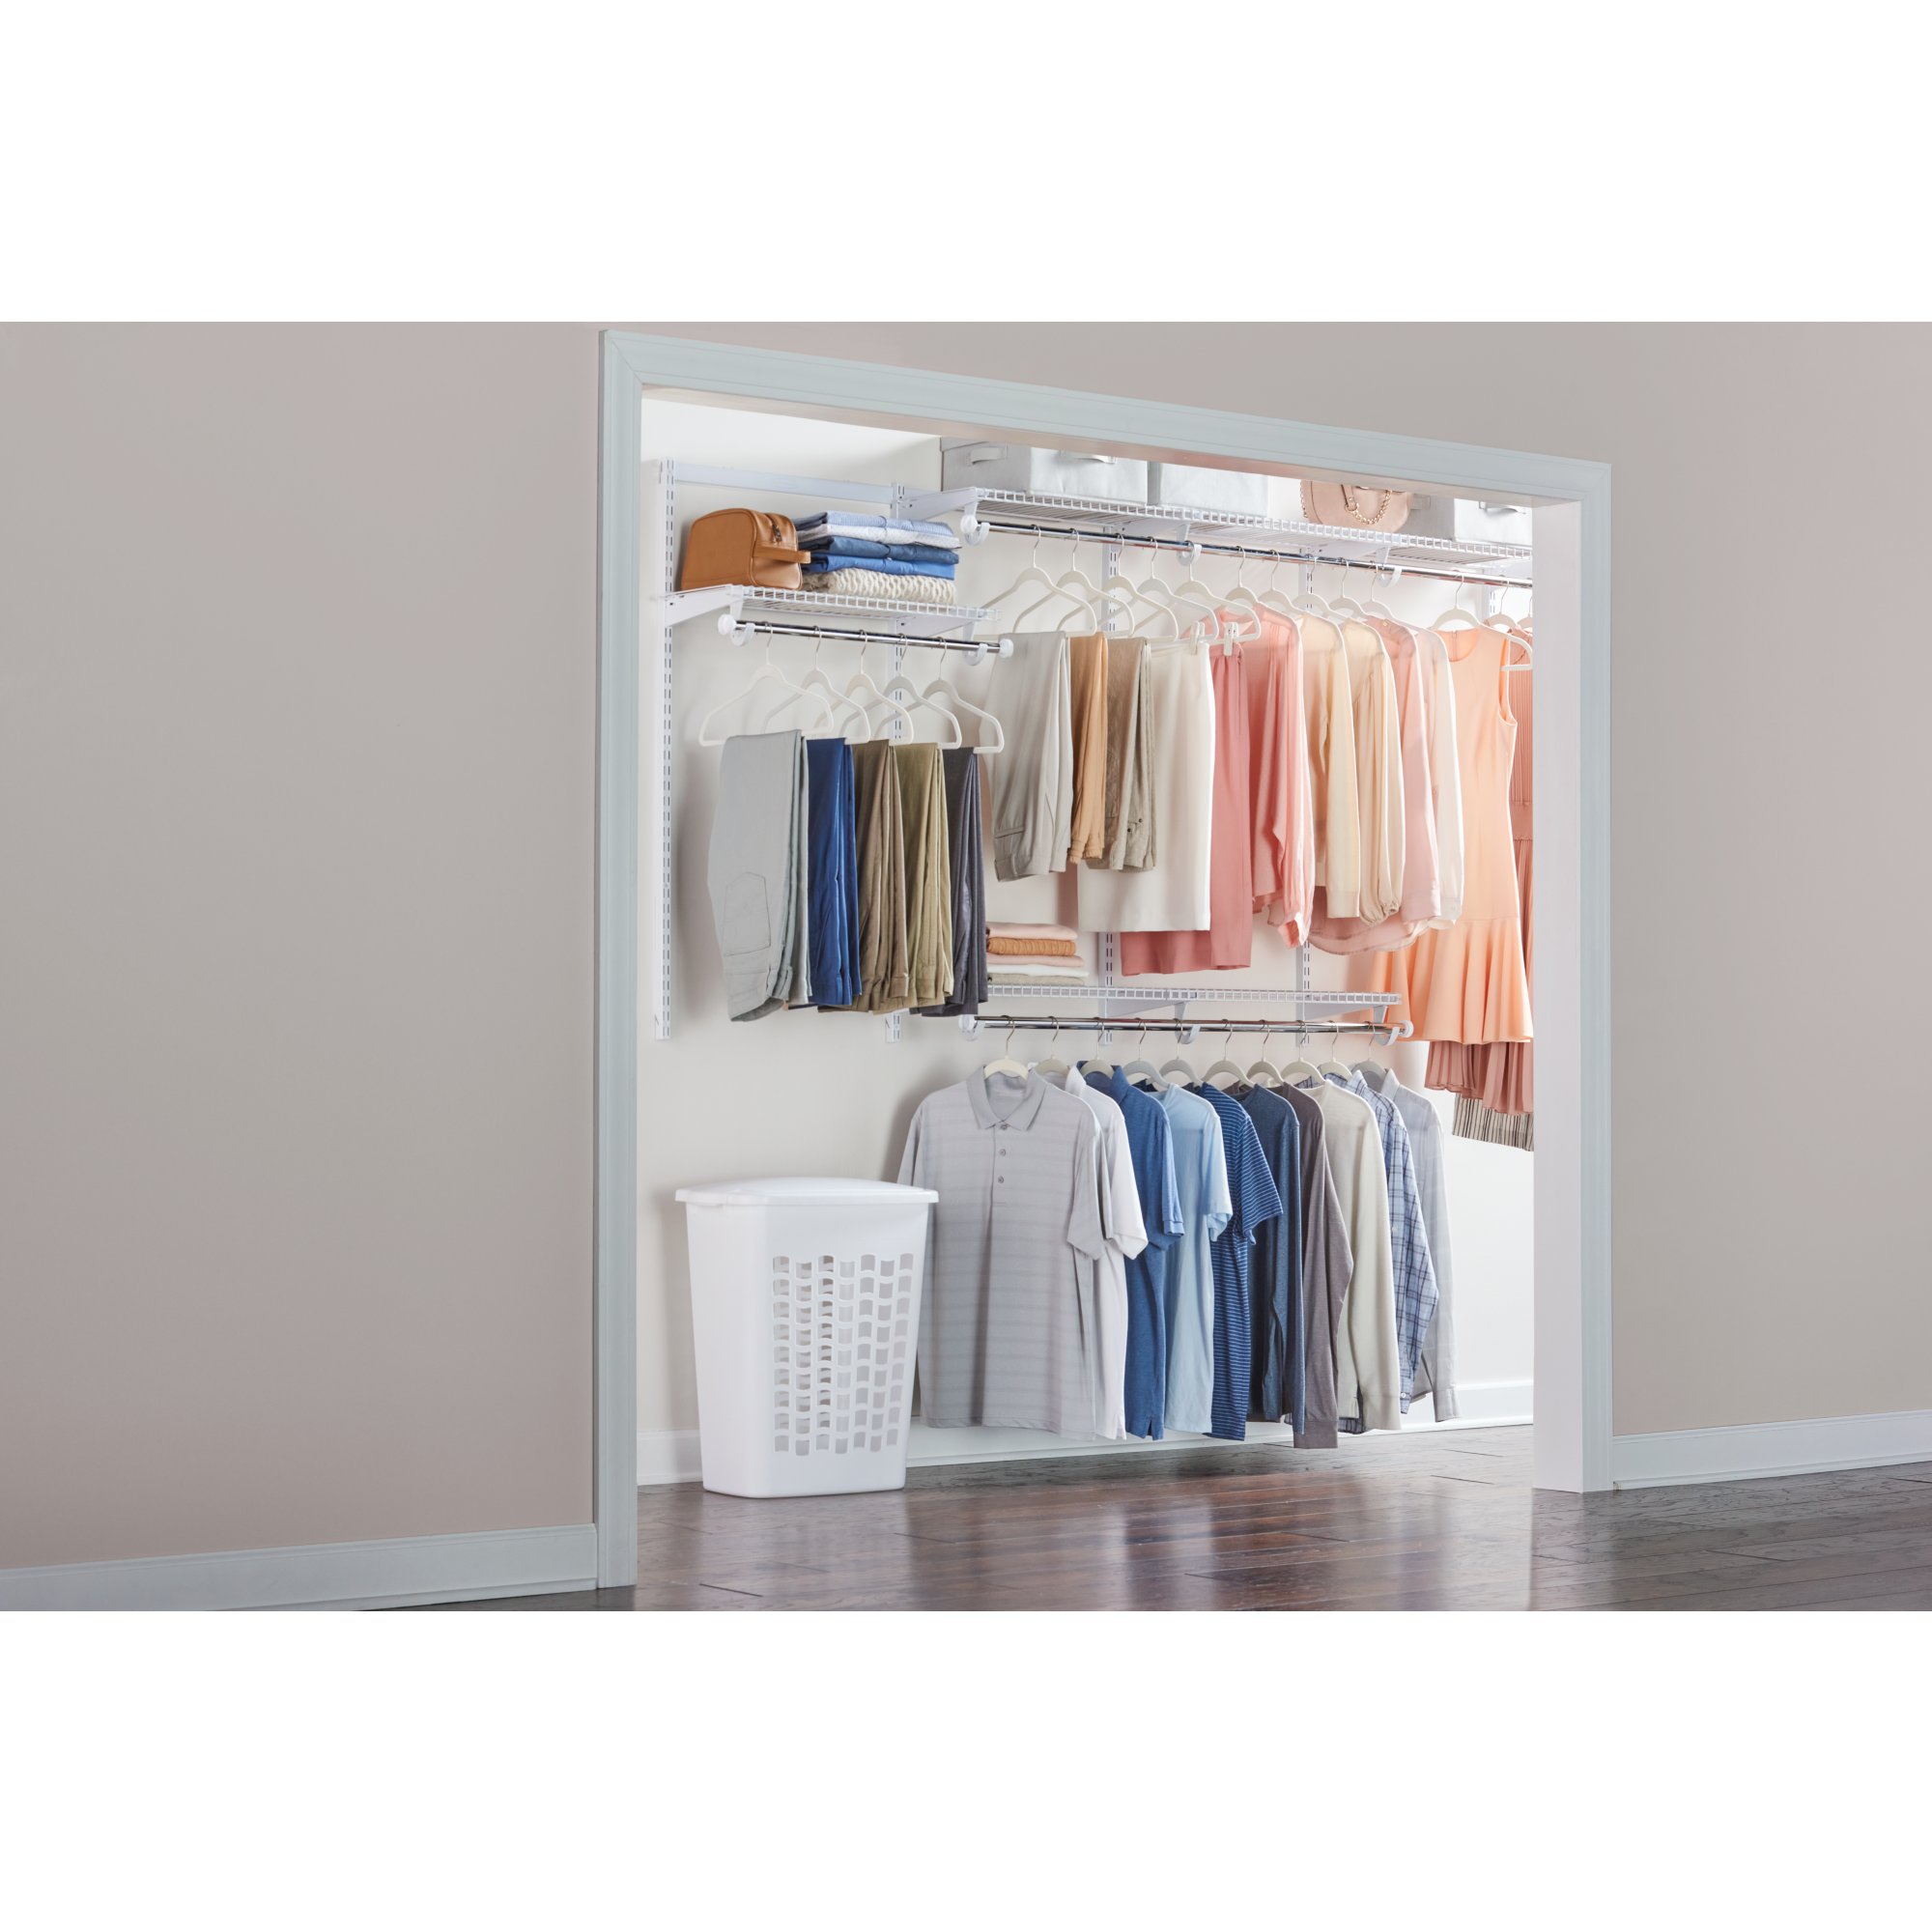 The Pacific Standard — Nursery Closet Reveal with Rubbermaid